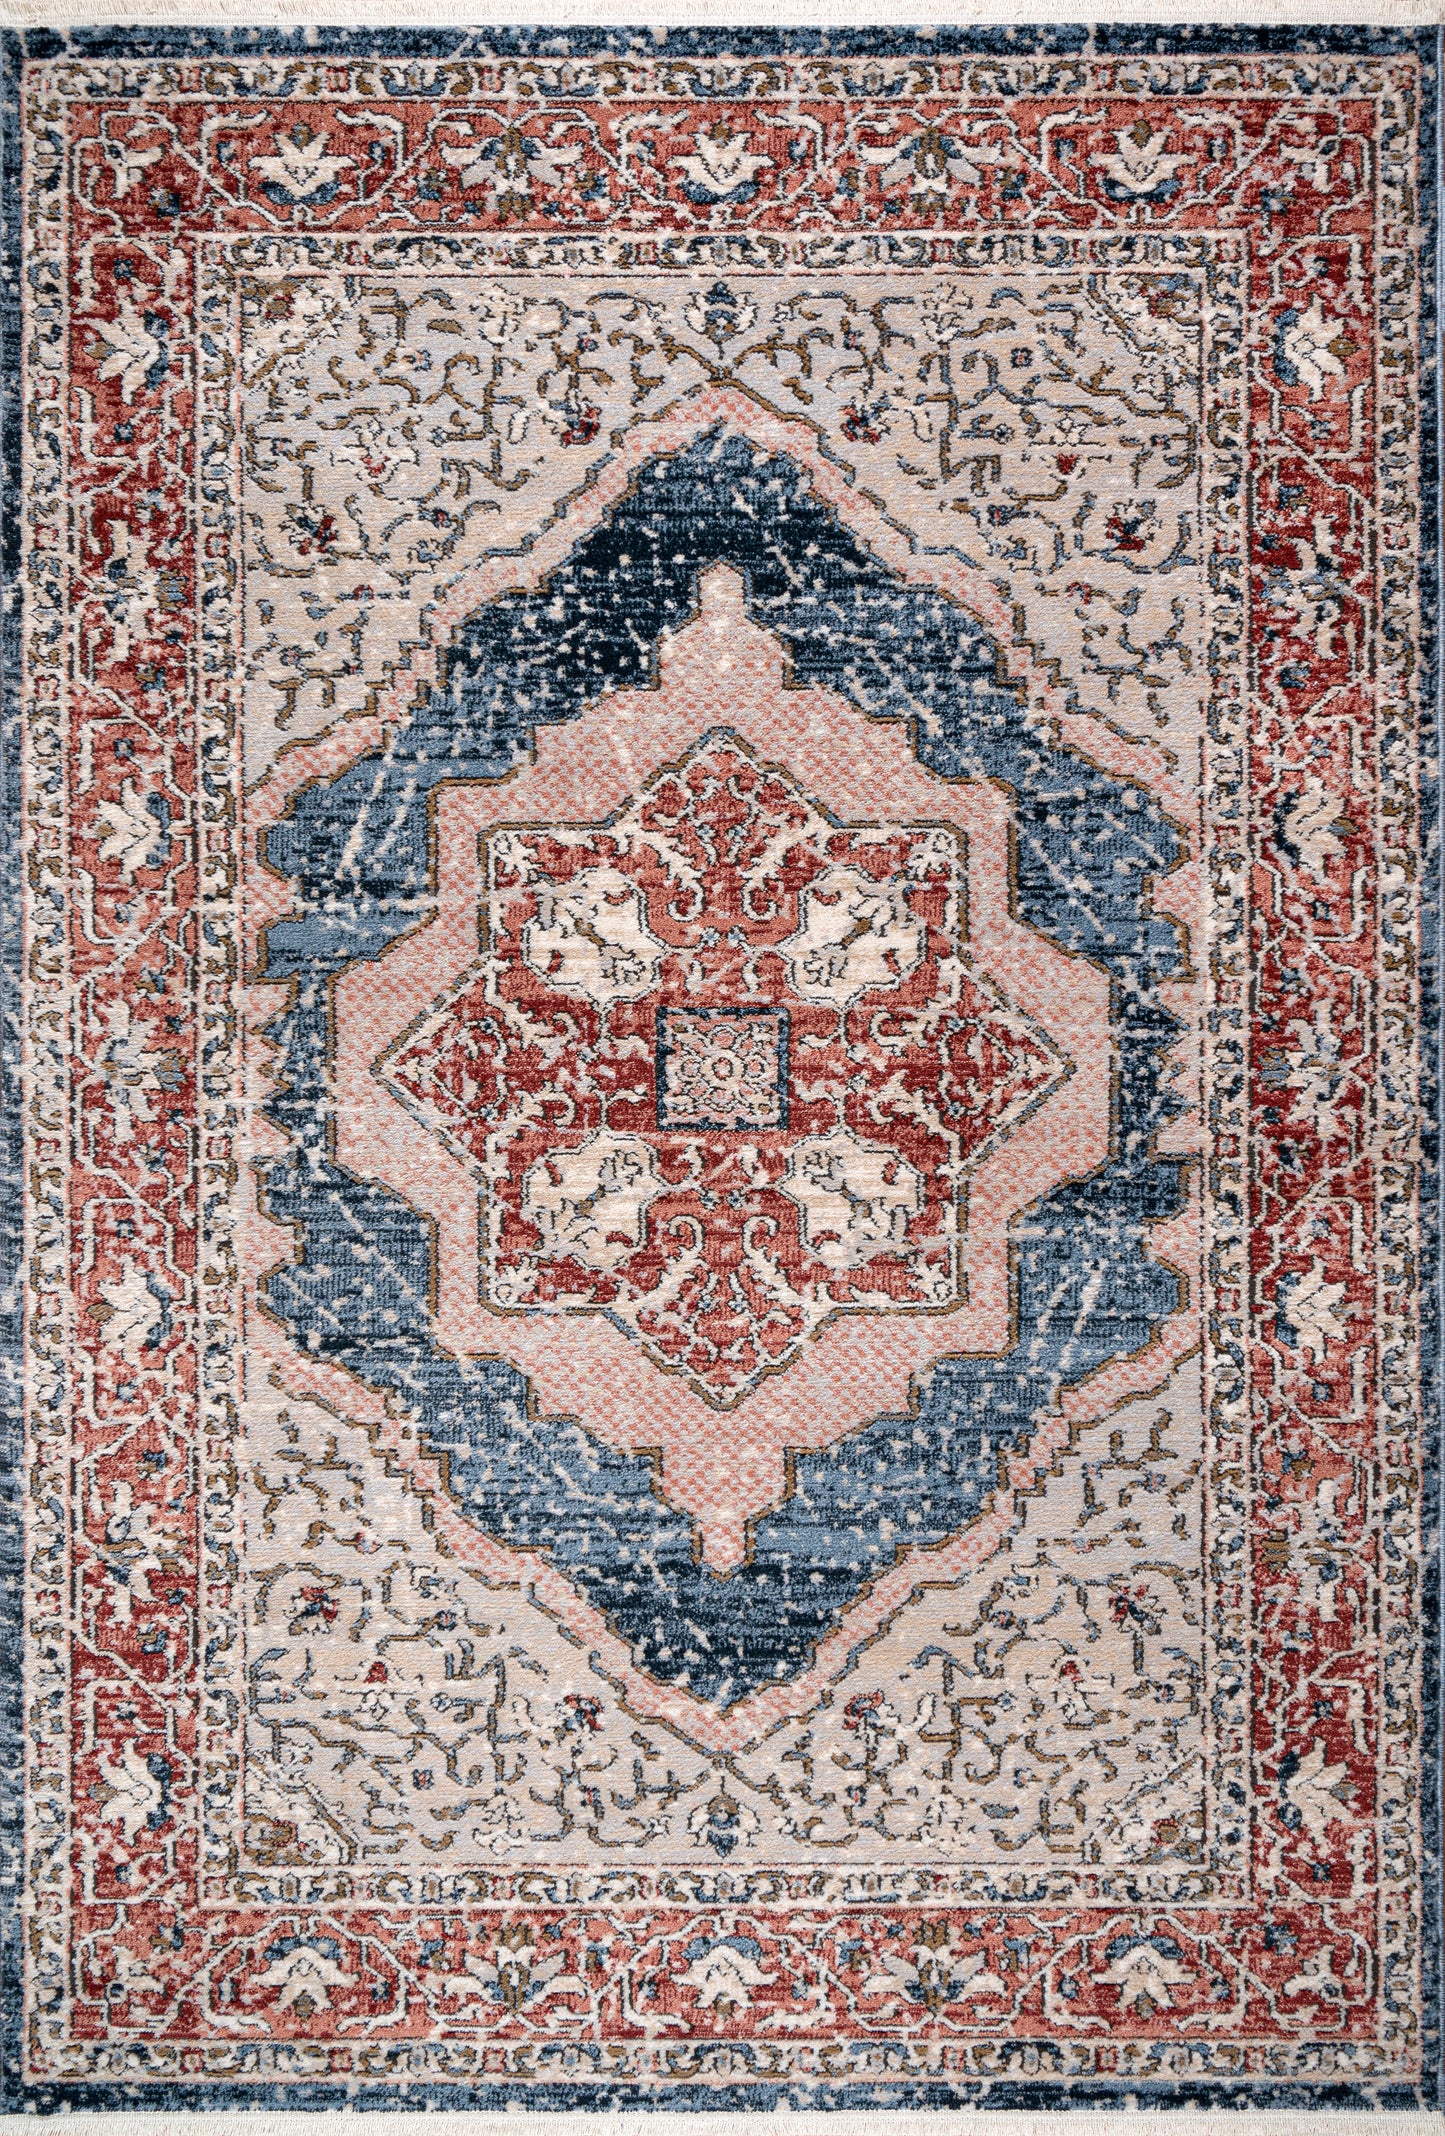 red blue traditional oriental area rug for living room bedroom 2x5, 3x5 Runner Rug, Entry Way, Entrance, Balcony, Bedside, Home Office, Table Top